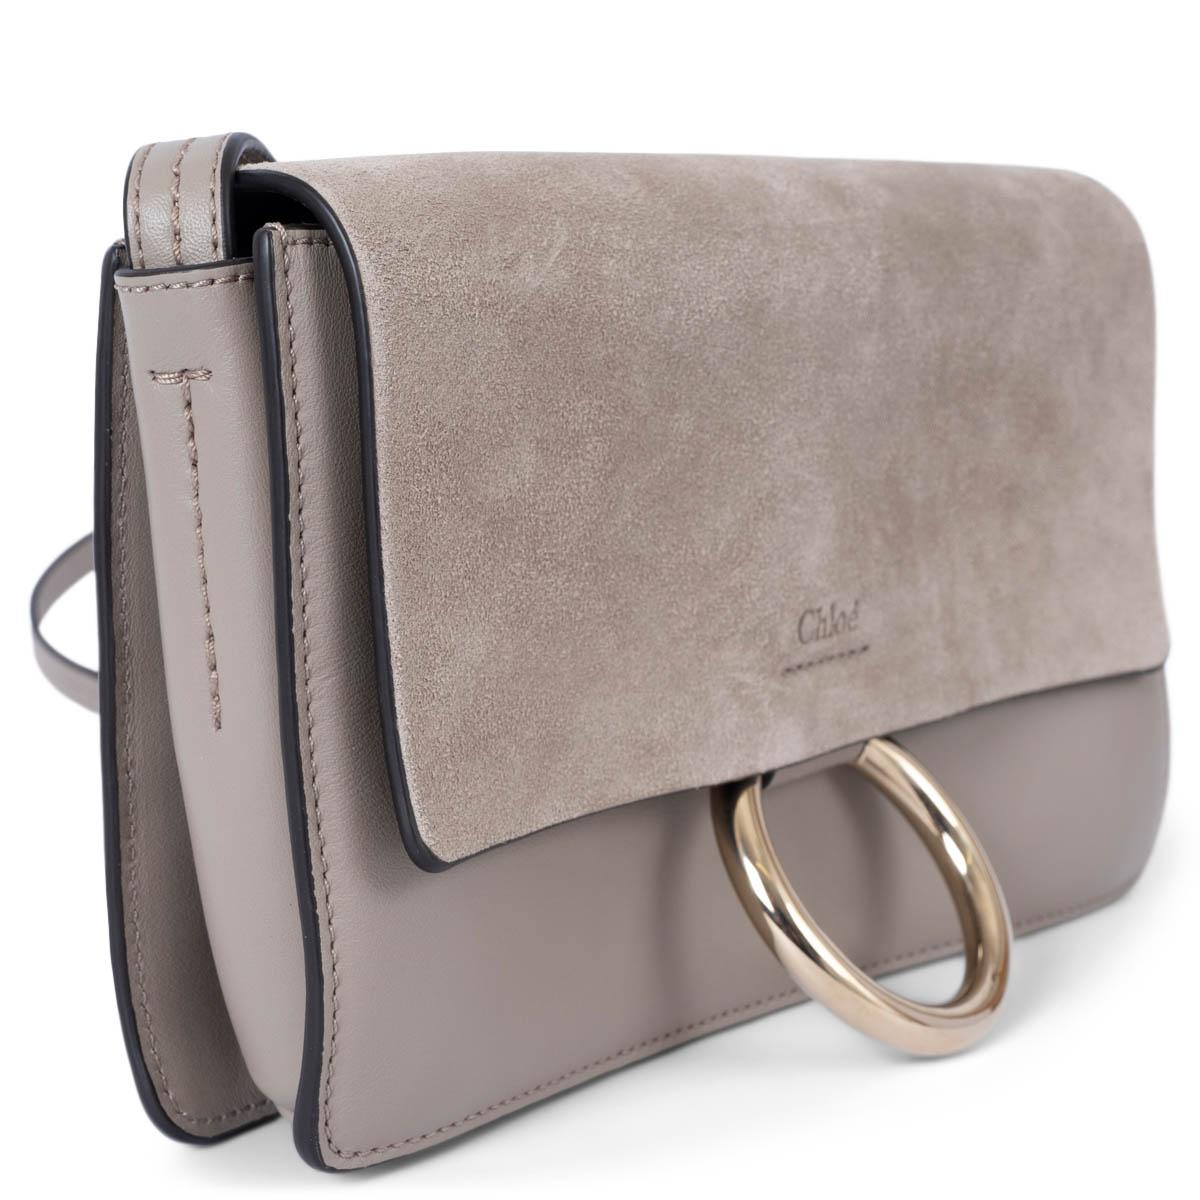 100% authentic Chloé Faye small crossbody bag in taupe leather featuring suede fold over flap. The design features light gold-tone hardware with a circular ring and snap button closure. The interior is lined in cream suede and divided in three